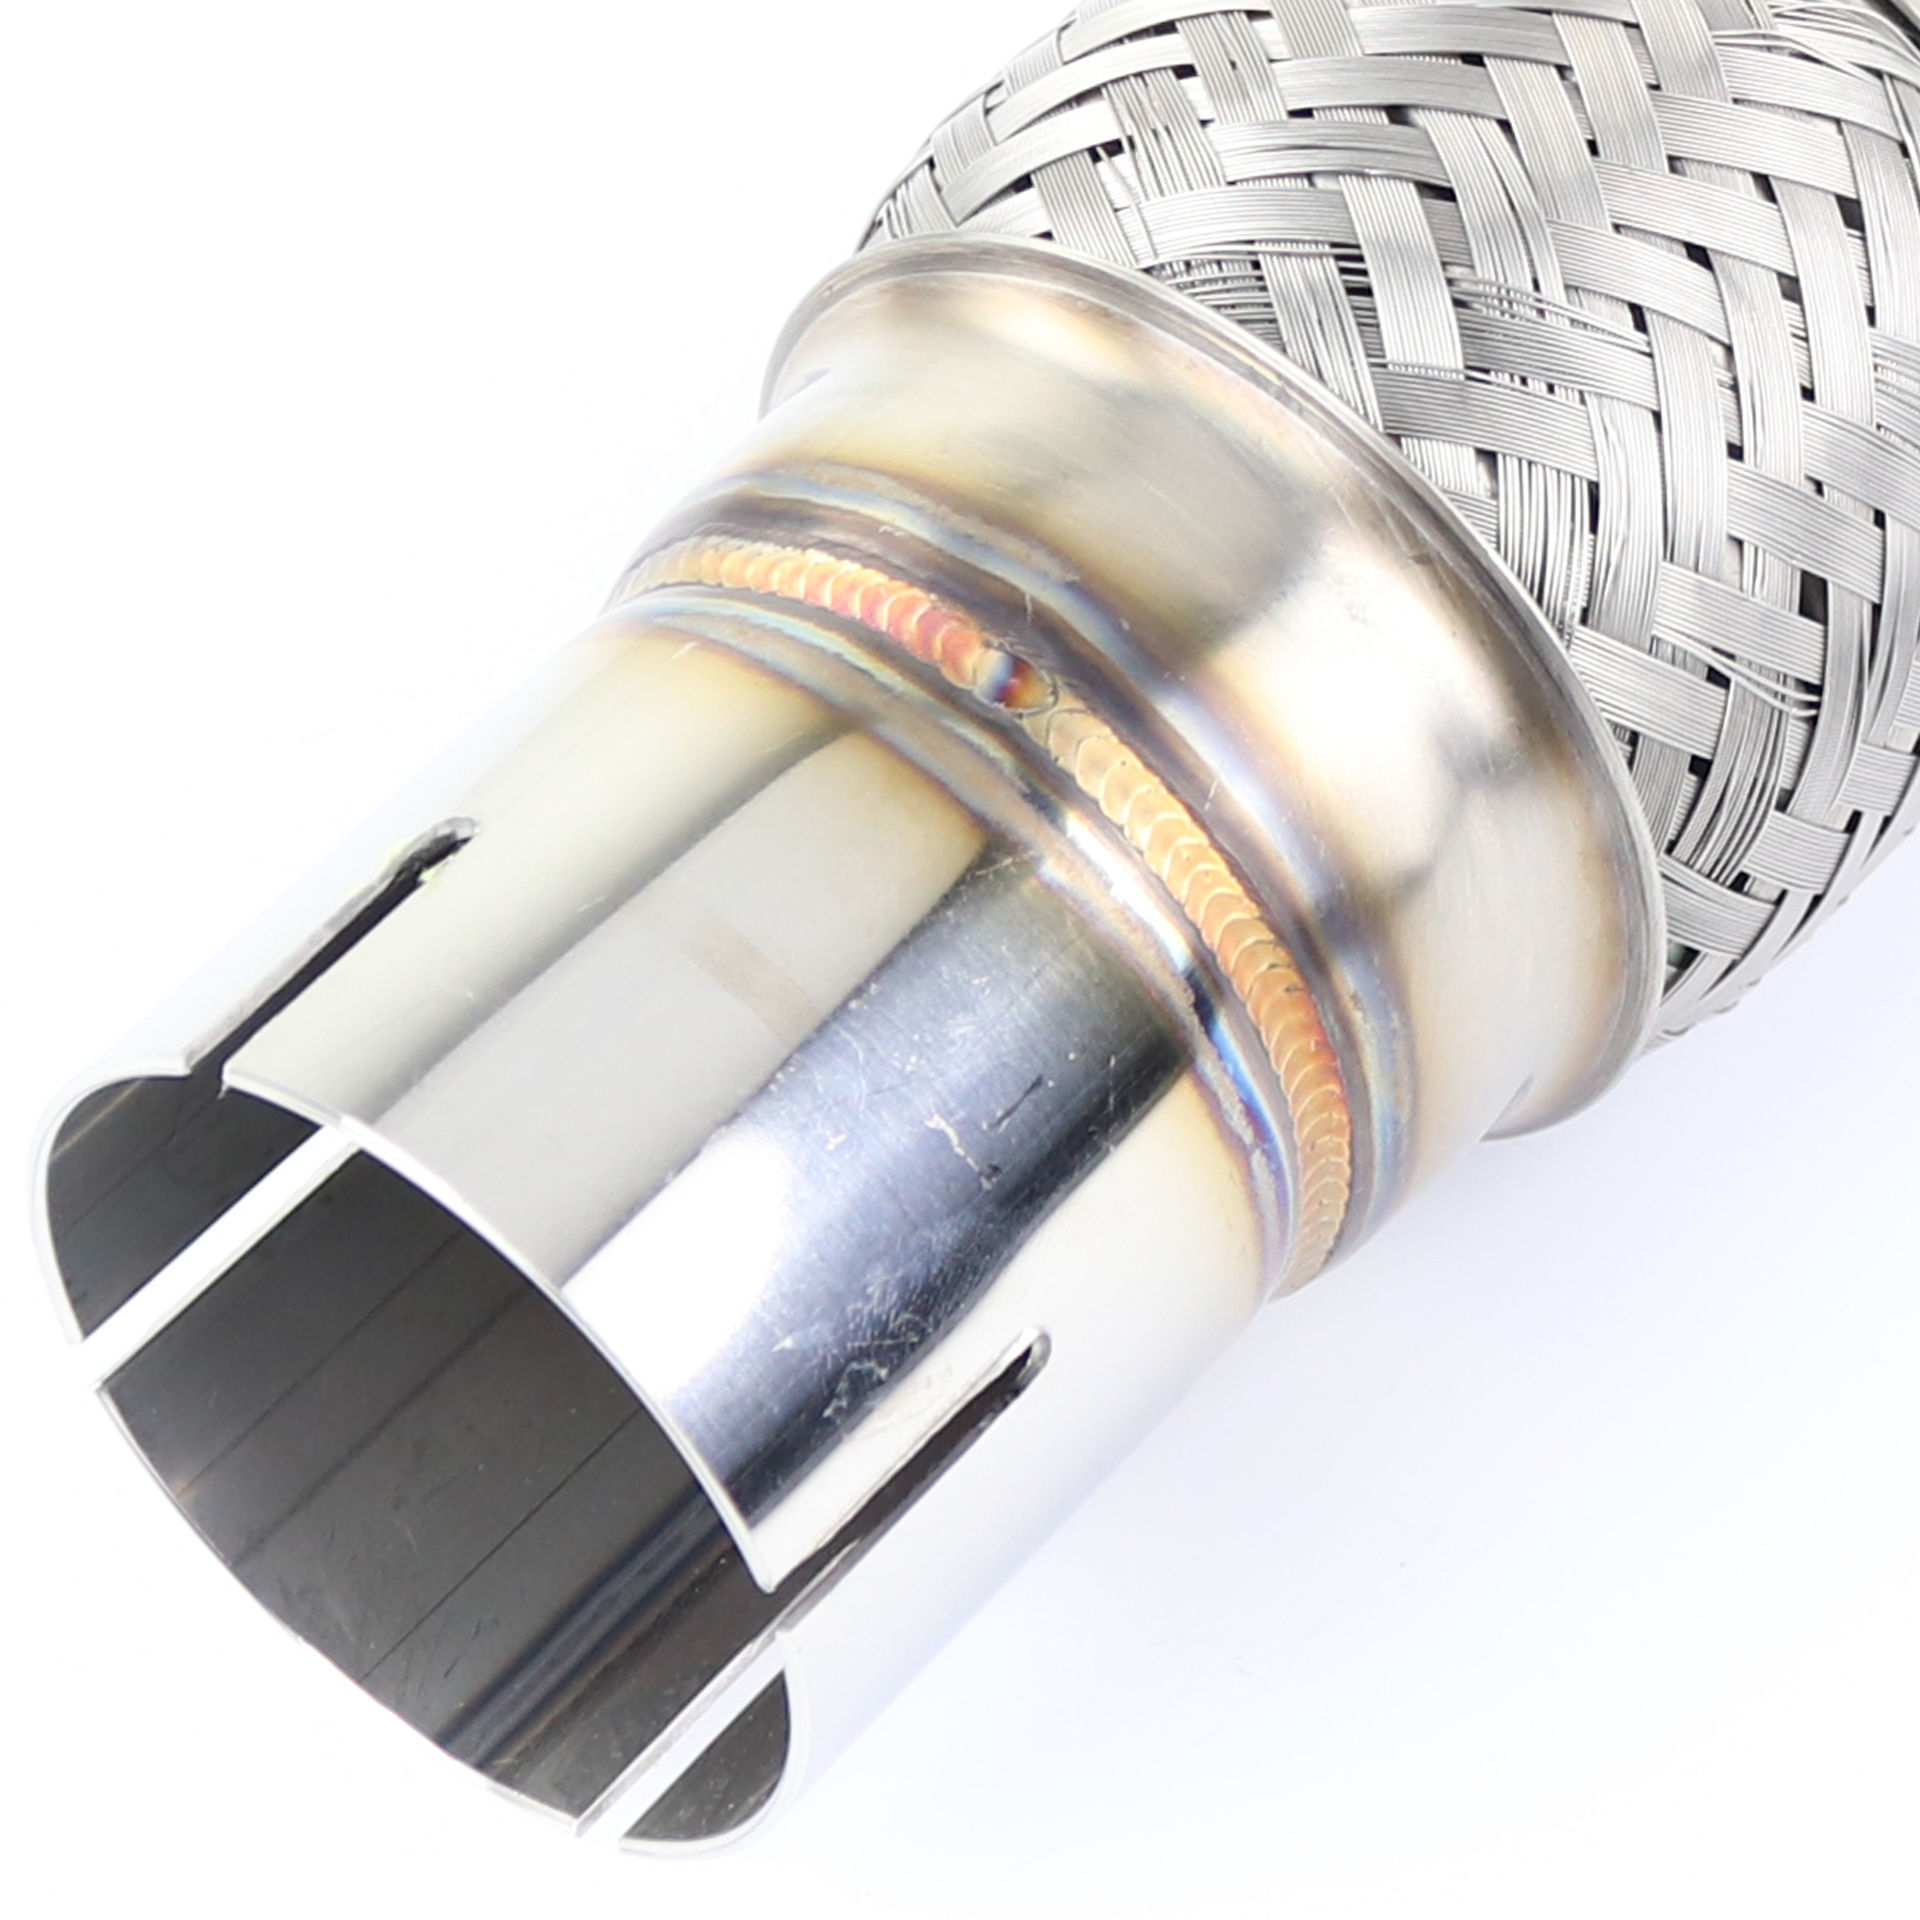 2.5" (2 1/2 in.) x 6" Flex Pipe Exhaust Coupling Quality  Stainless Heavy Duty